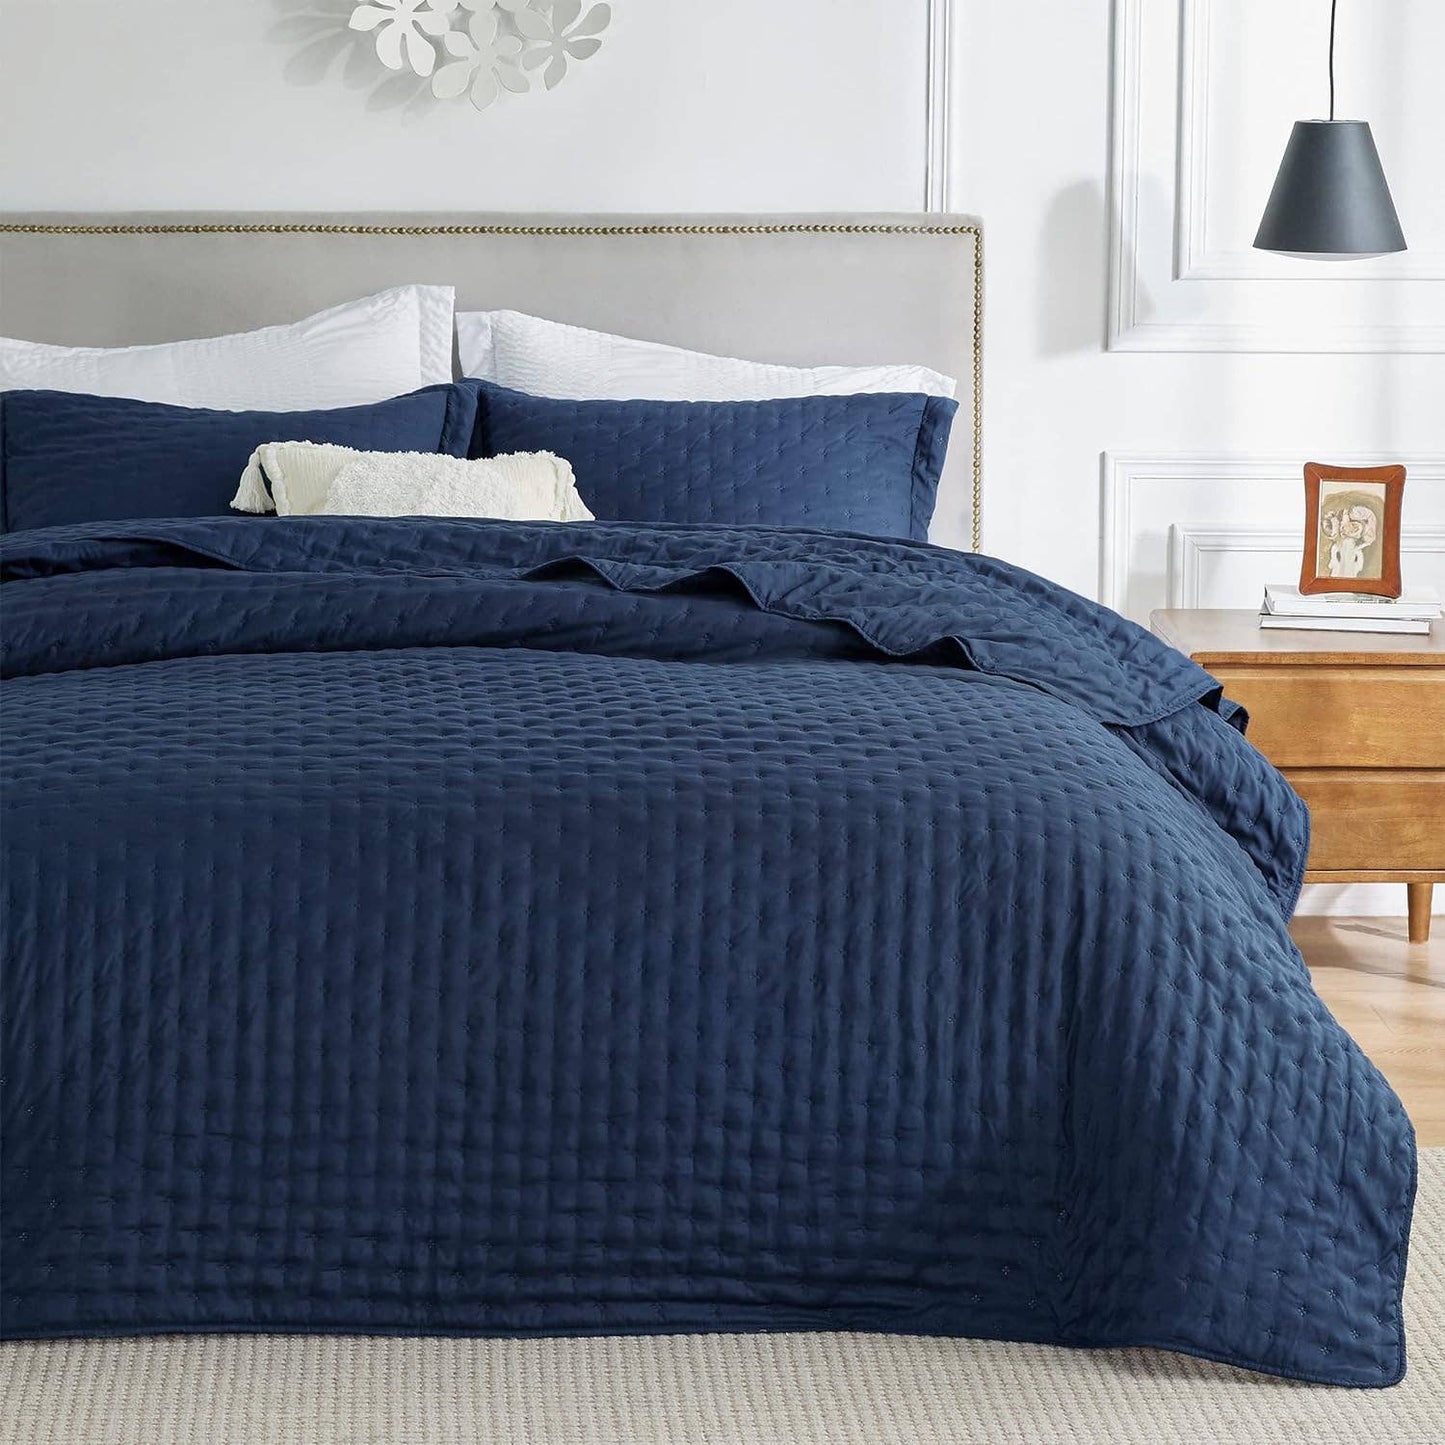 New Navy Bedsure Queen Quilted Comforter and 2 shams for all seasons